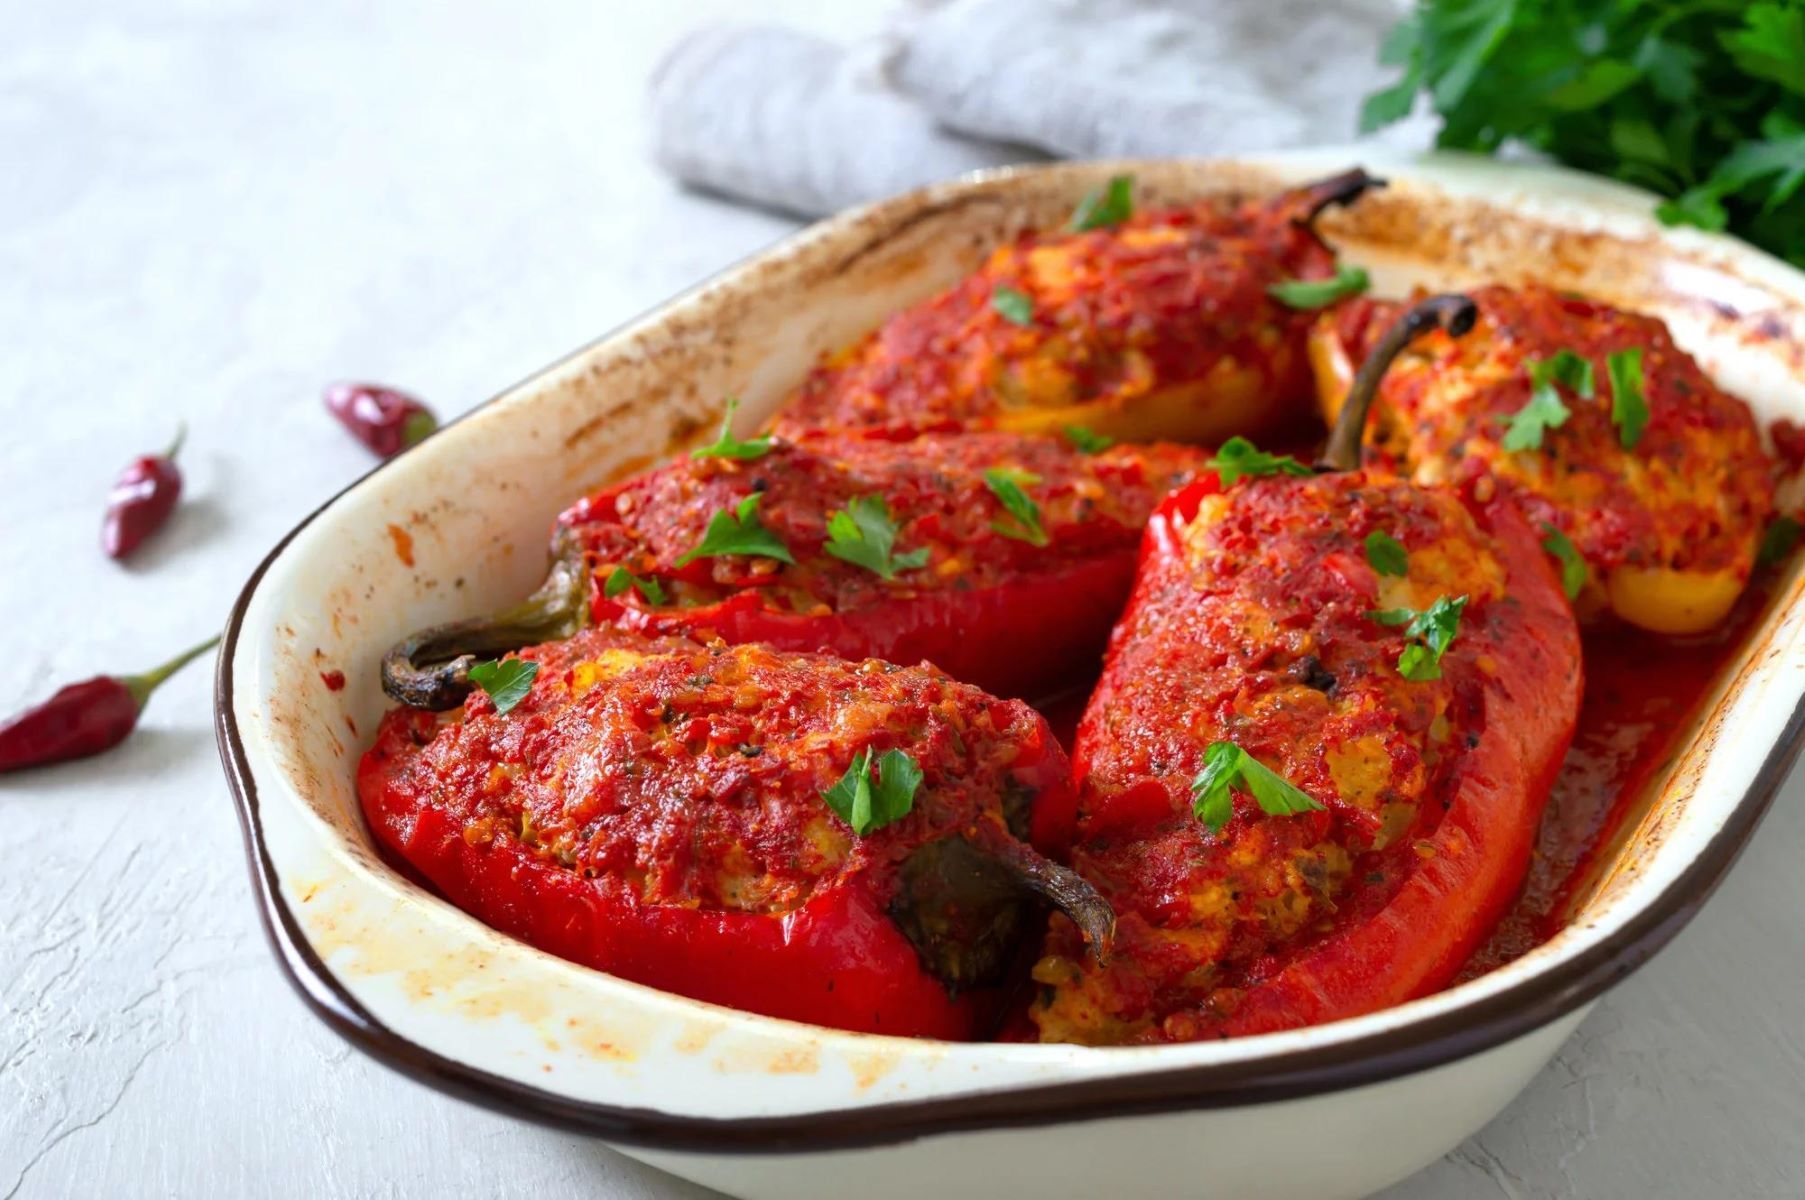 Stuffed Red Peppers With Eggplant: A Delicious And Flavorful